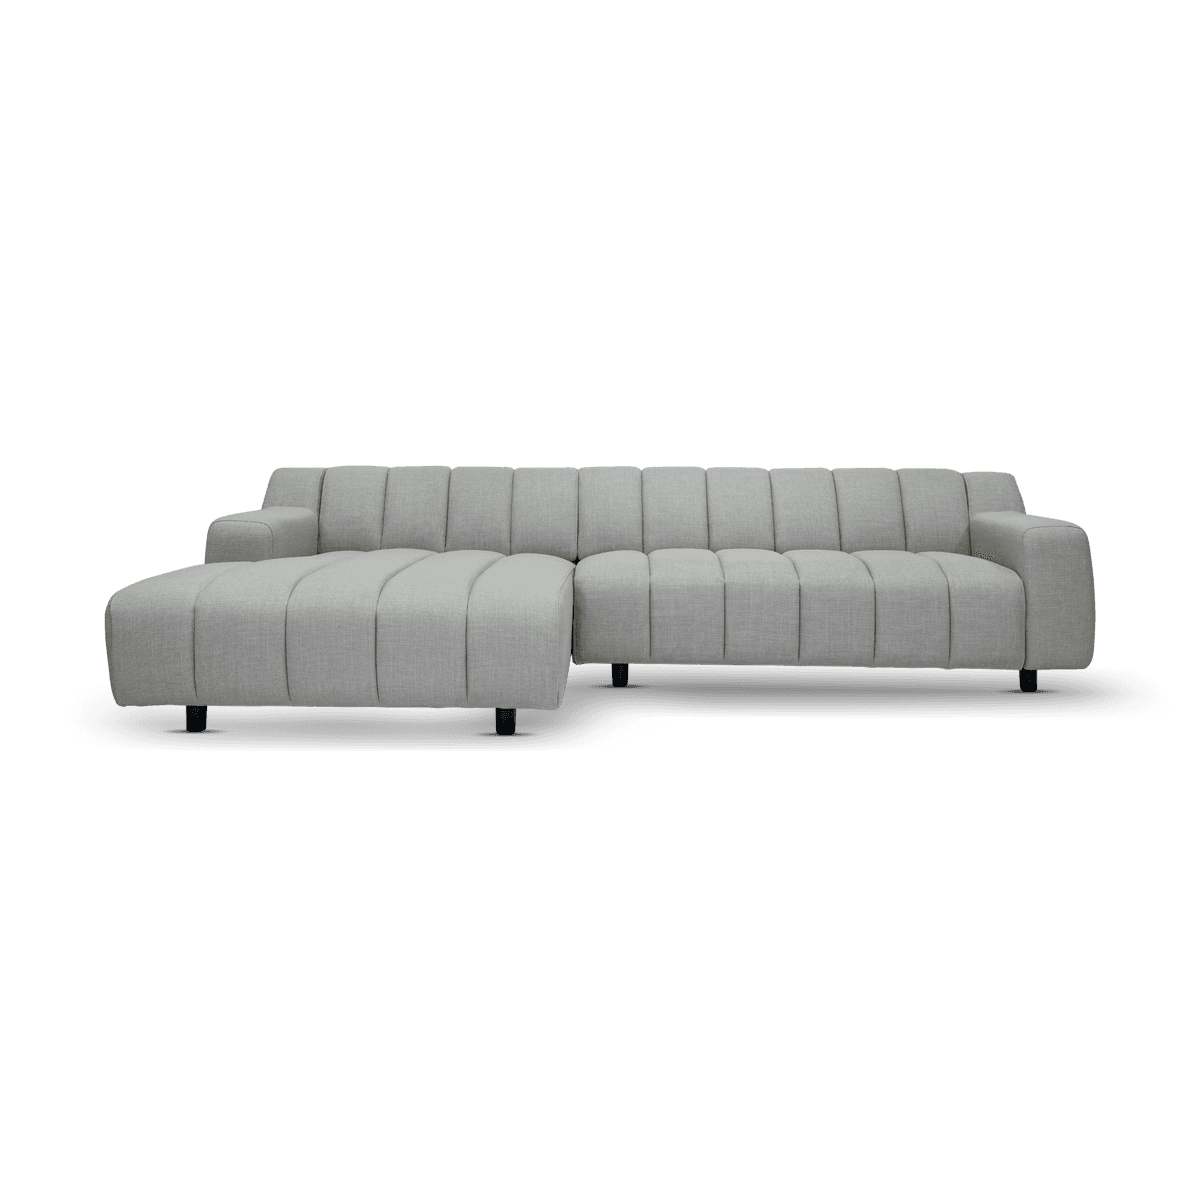 Oakland 2.5 Seater Sofa With Left Chaise longue, Beige